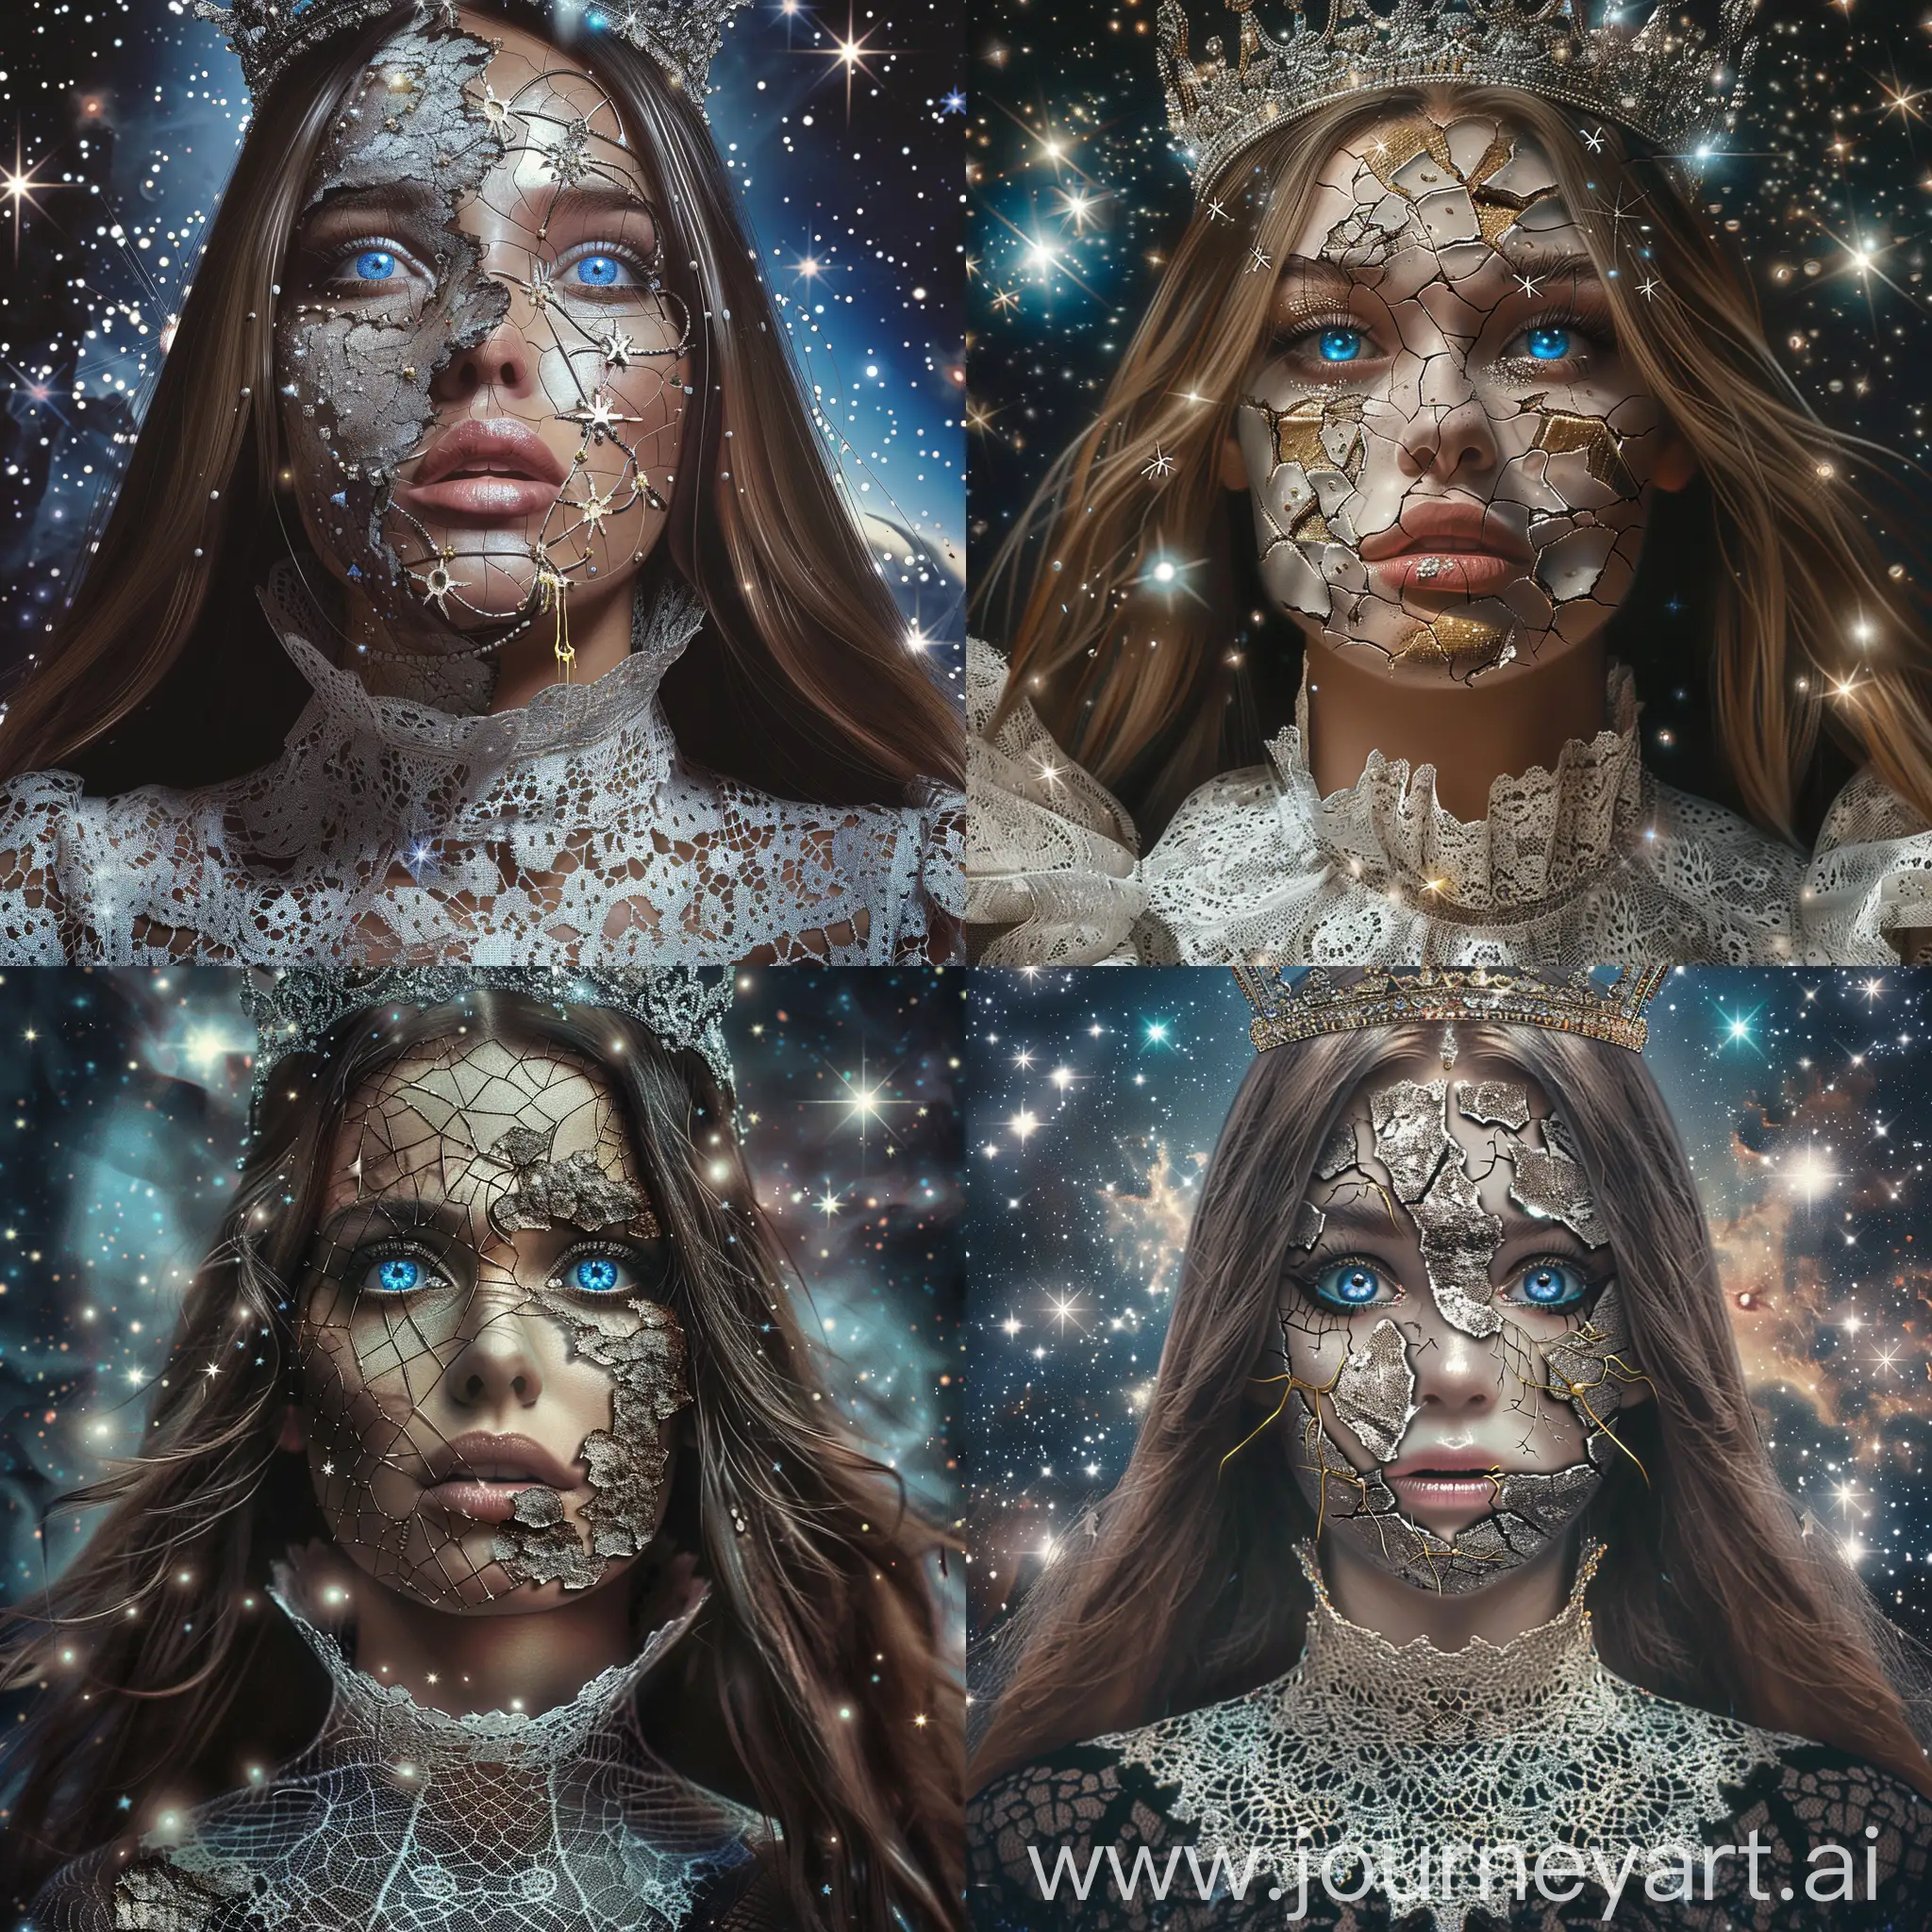 Surreal-Queen-with-Golden-Glue-Repairs-and-Starry-Background